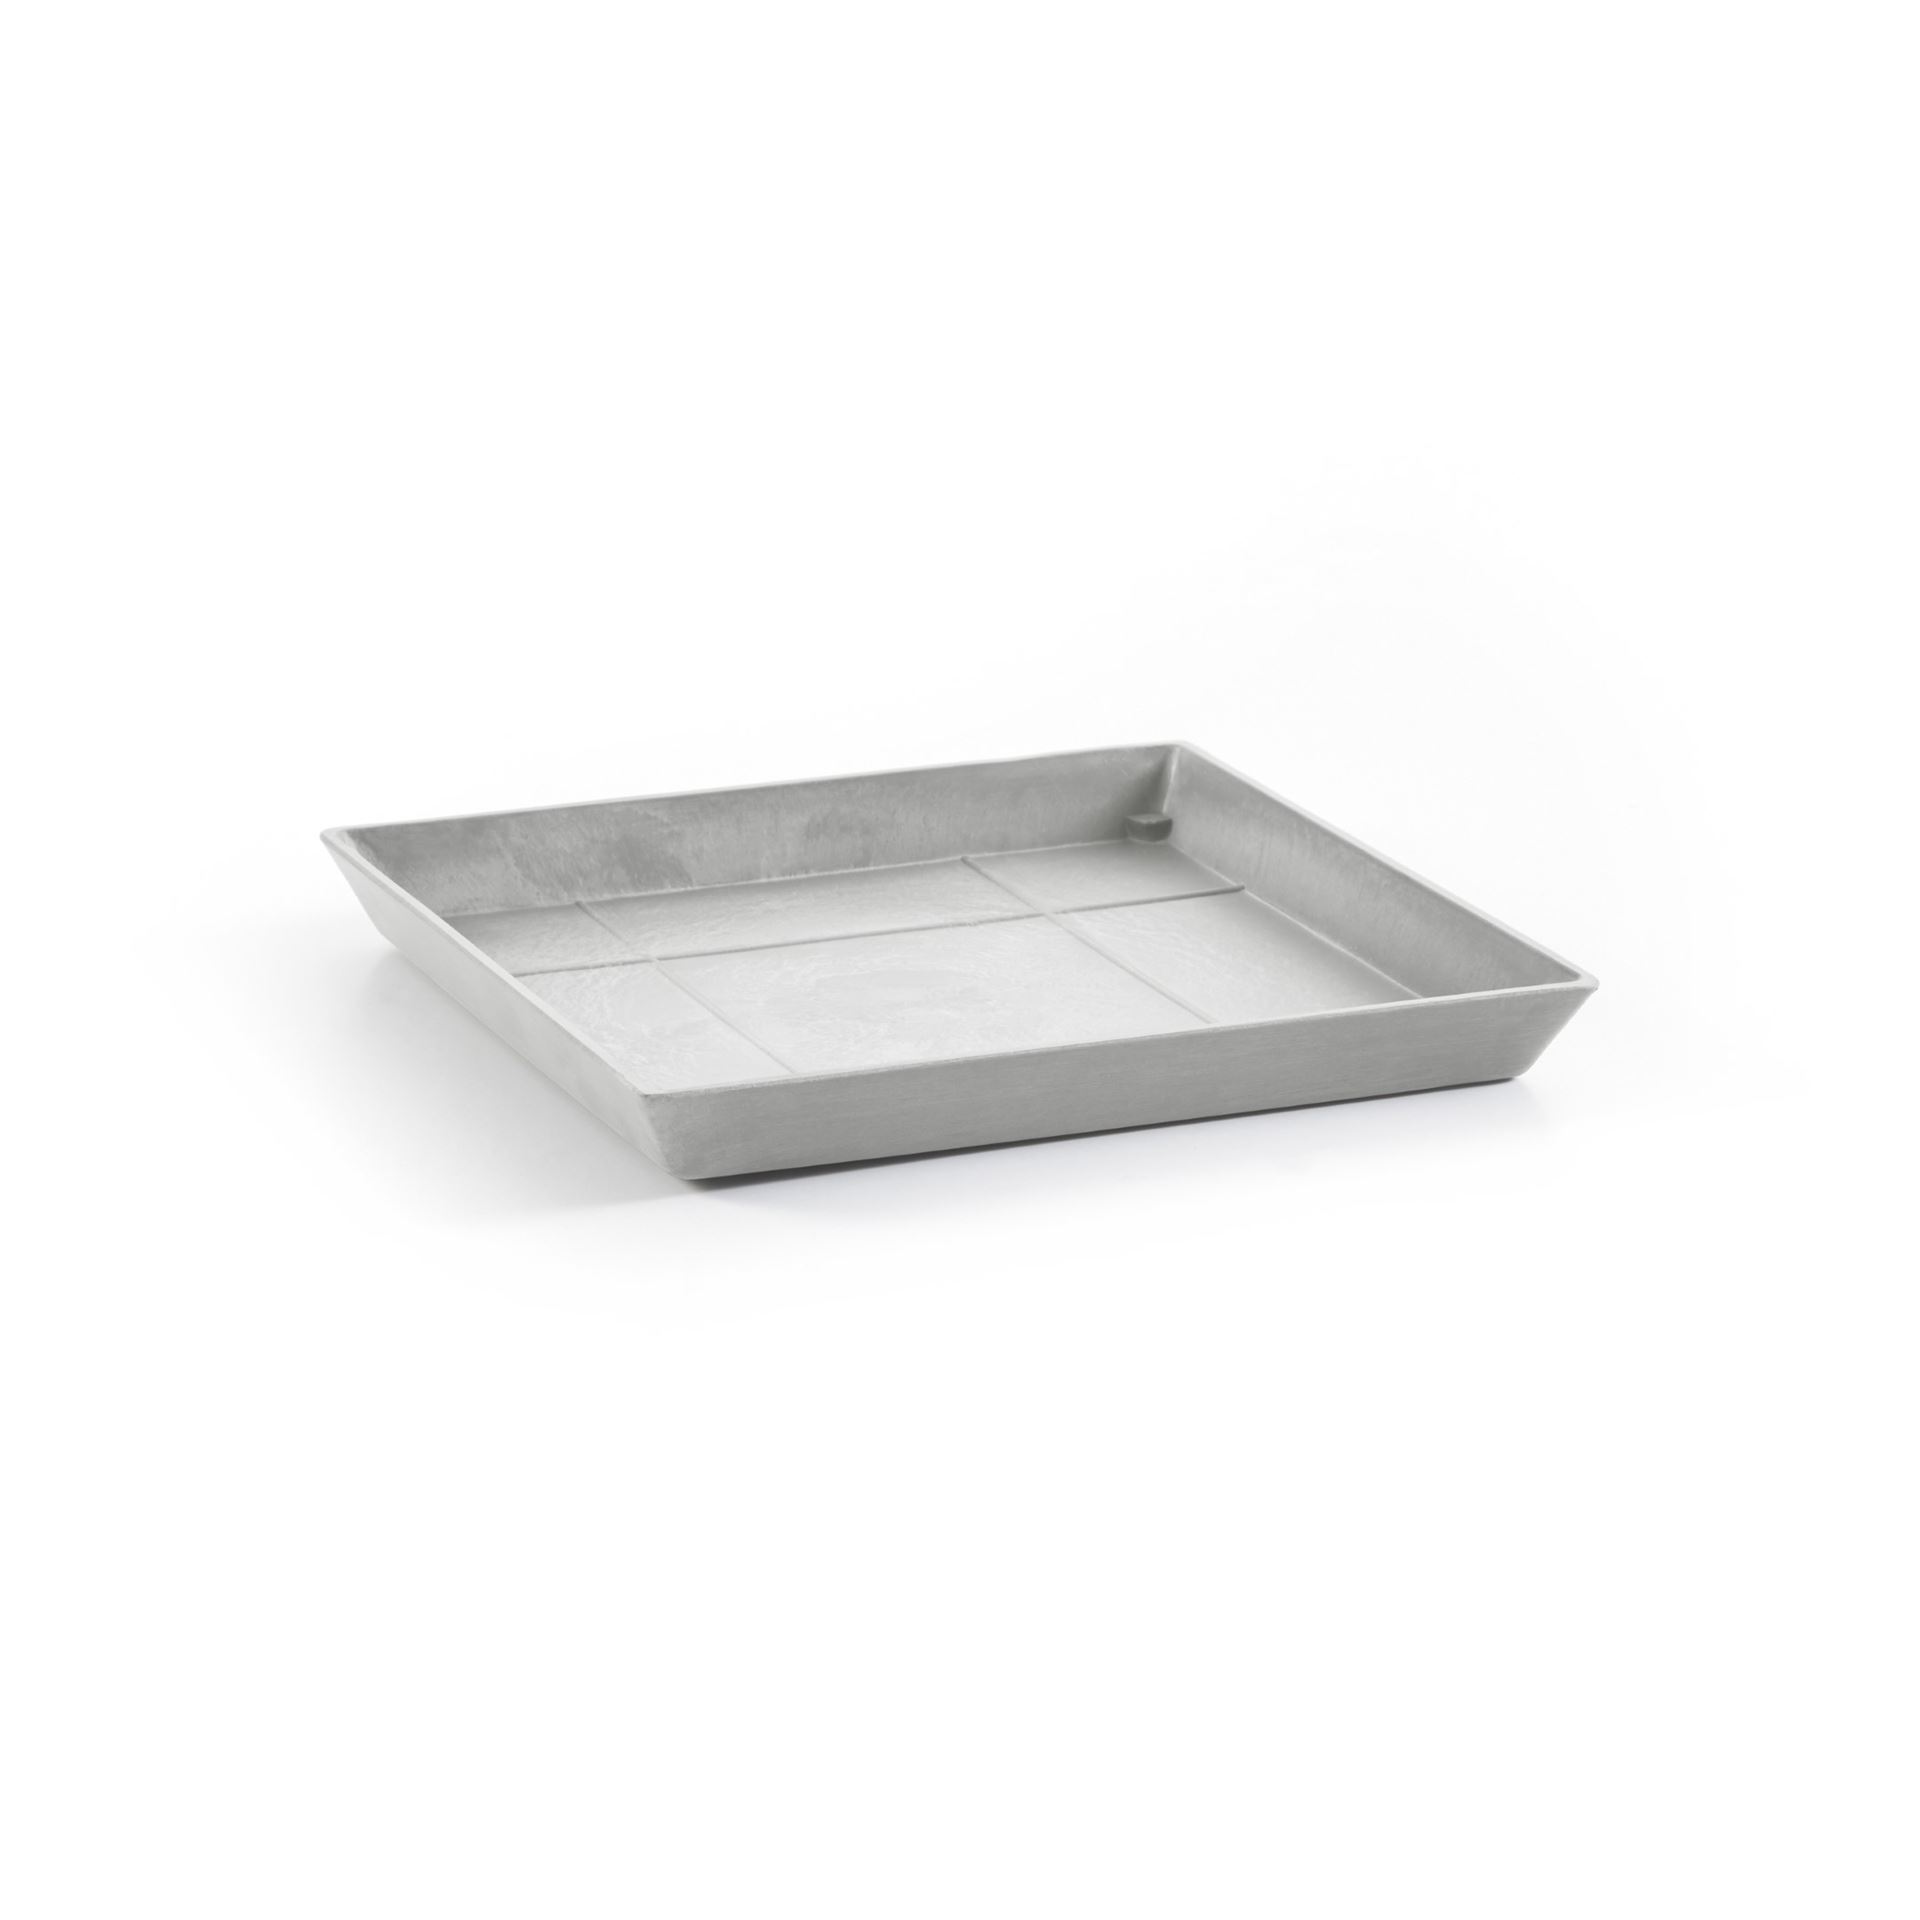 Ecopots Saucer Square - White Grey - 28 x H3 cm - Square white grey saucer with water reservoir